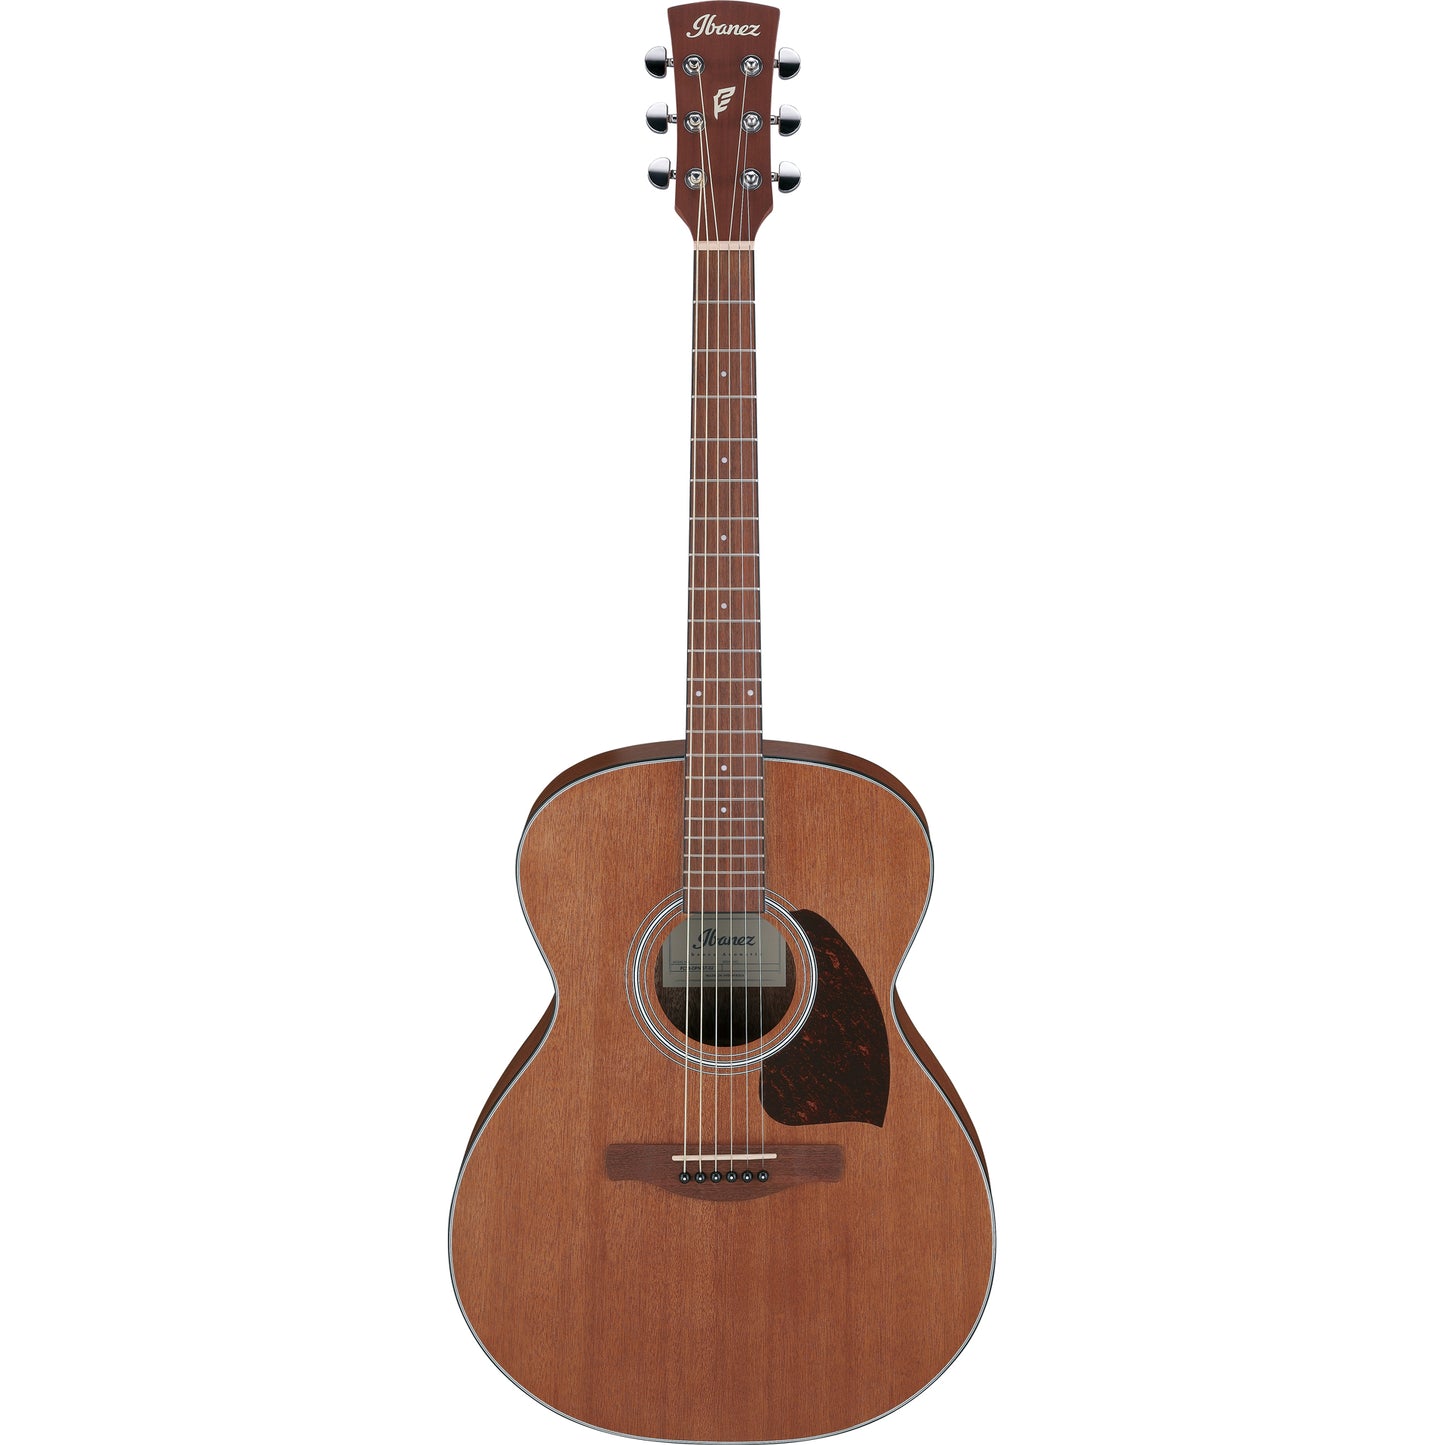 Ibanez PC54 6 String Acoustic Guitar - Open Pore Natural